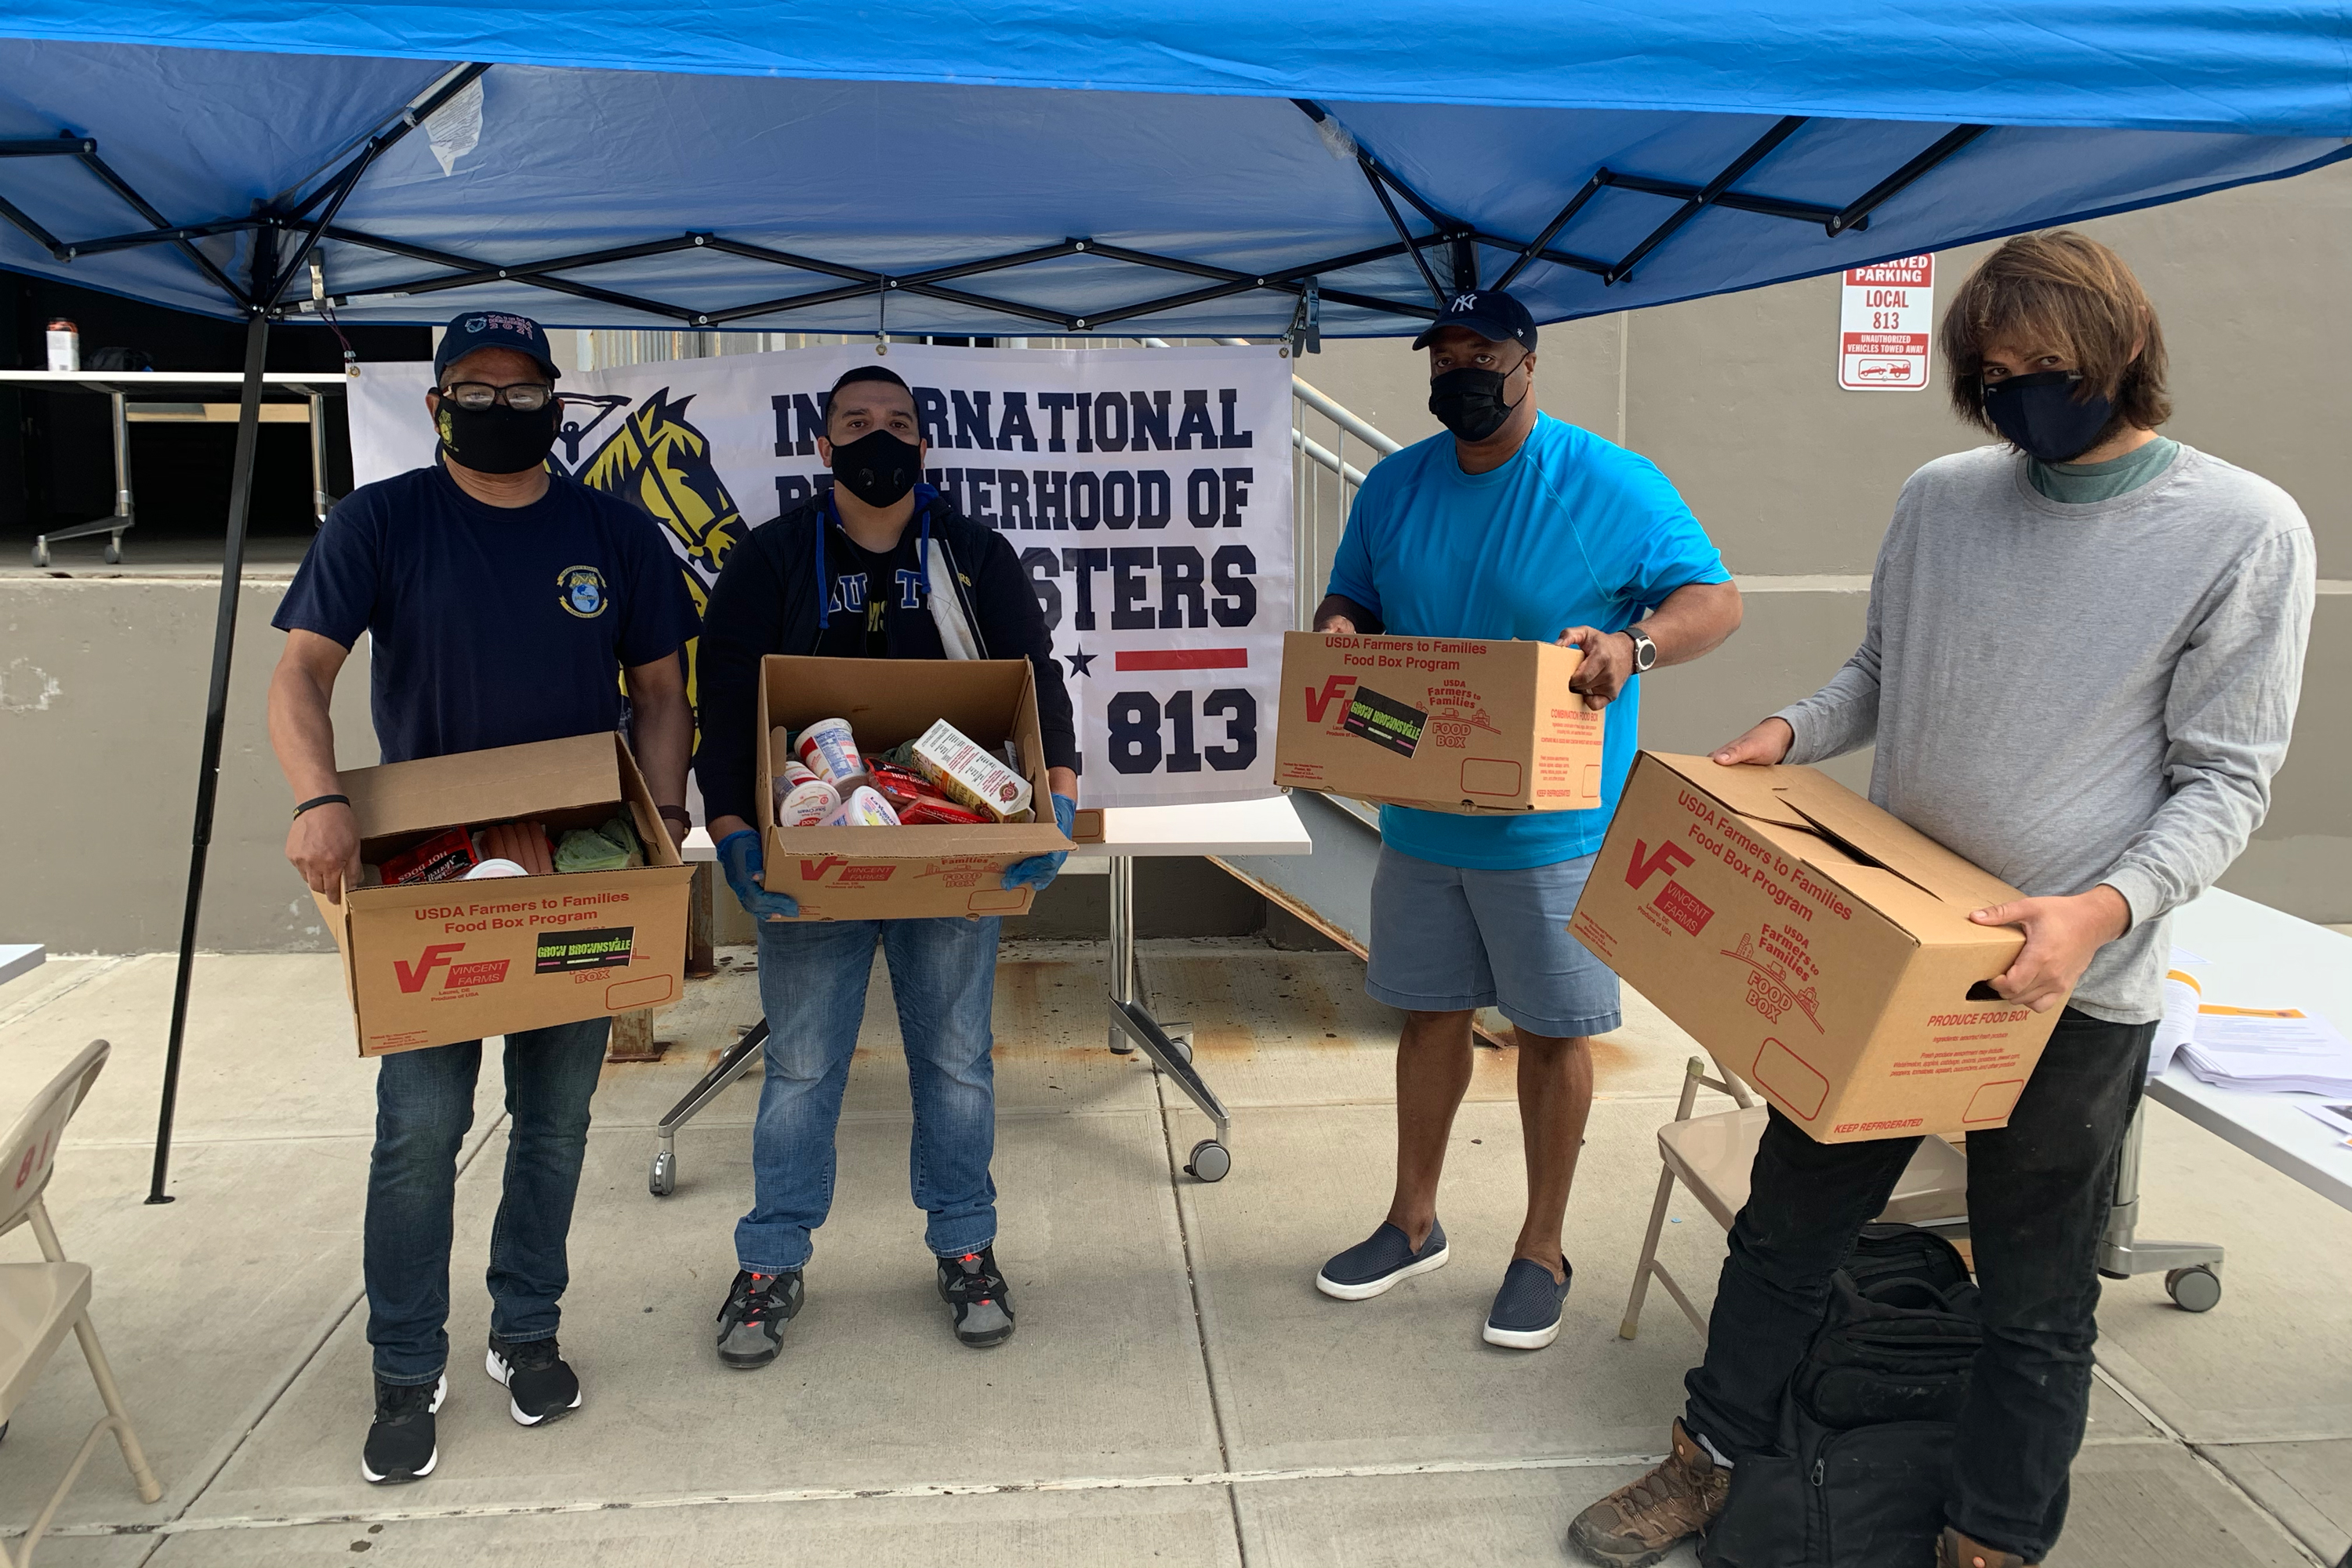 Teamsters Local 813 President Sean Campbell, second from right, takes part in a food relief event in Long Island City, Sept. 29, 2020.